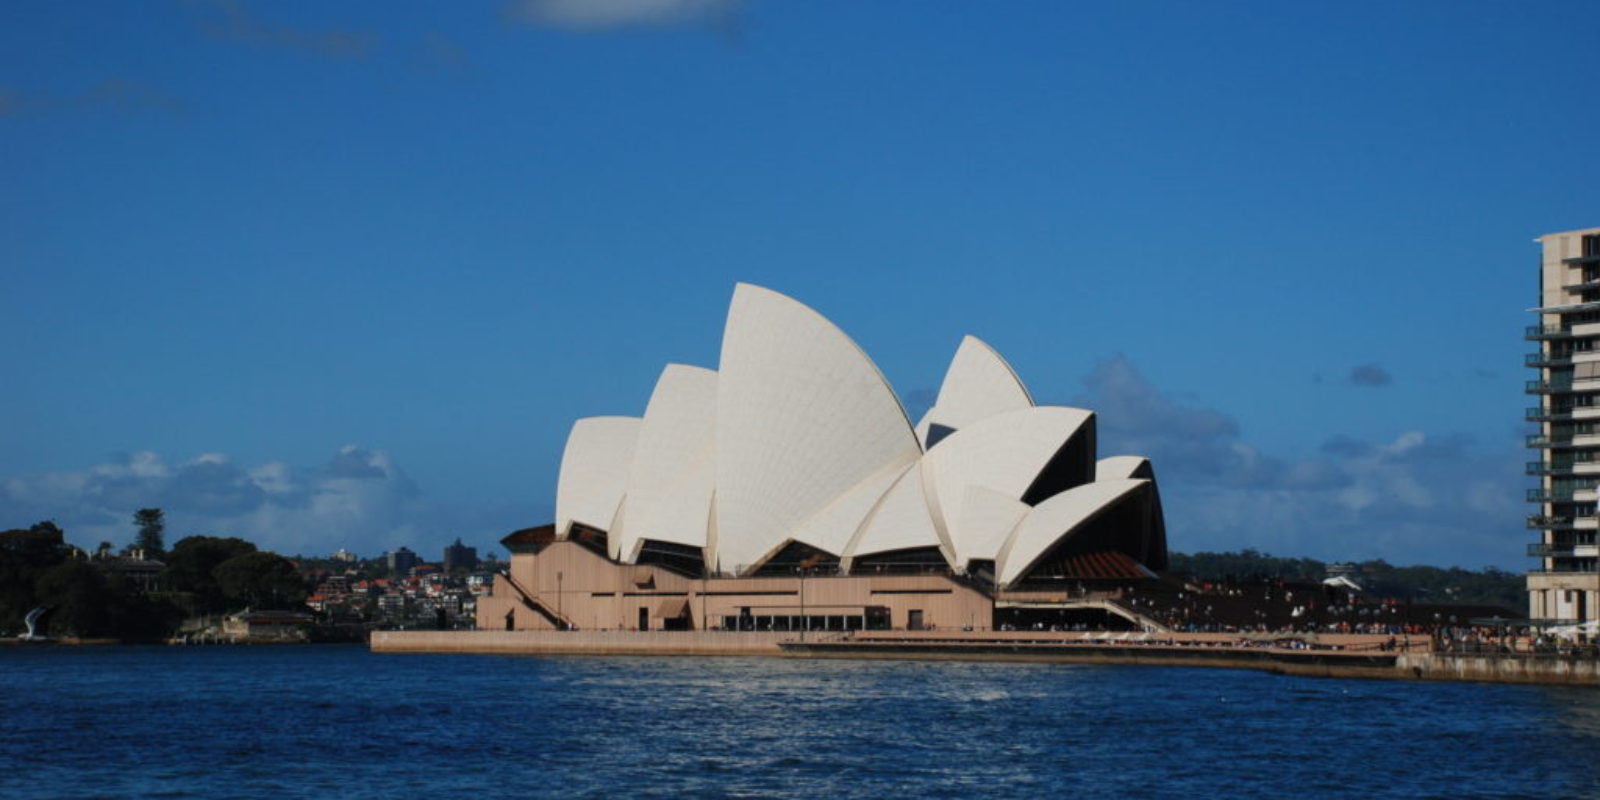 Sydney, Australia is one of the world's most popular tourist destinations. Host of the 2000 Olympics, home to several architectural icons, and surrounded...